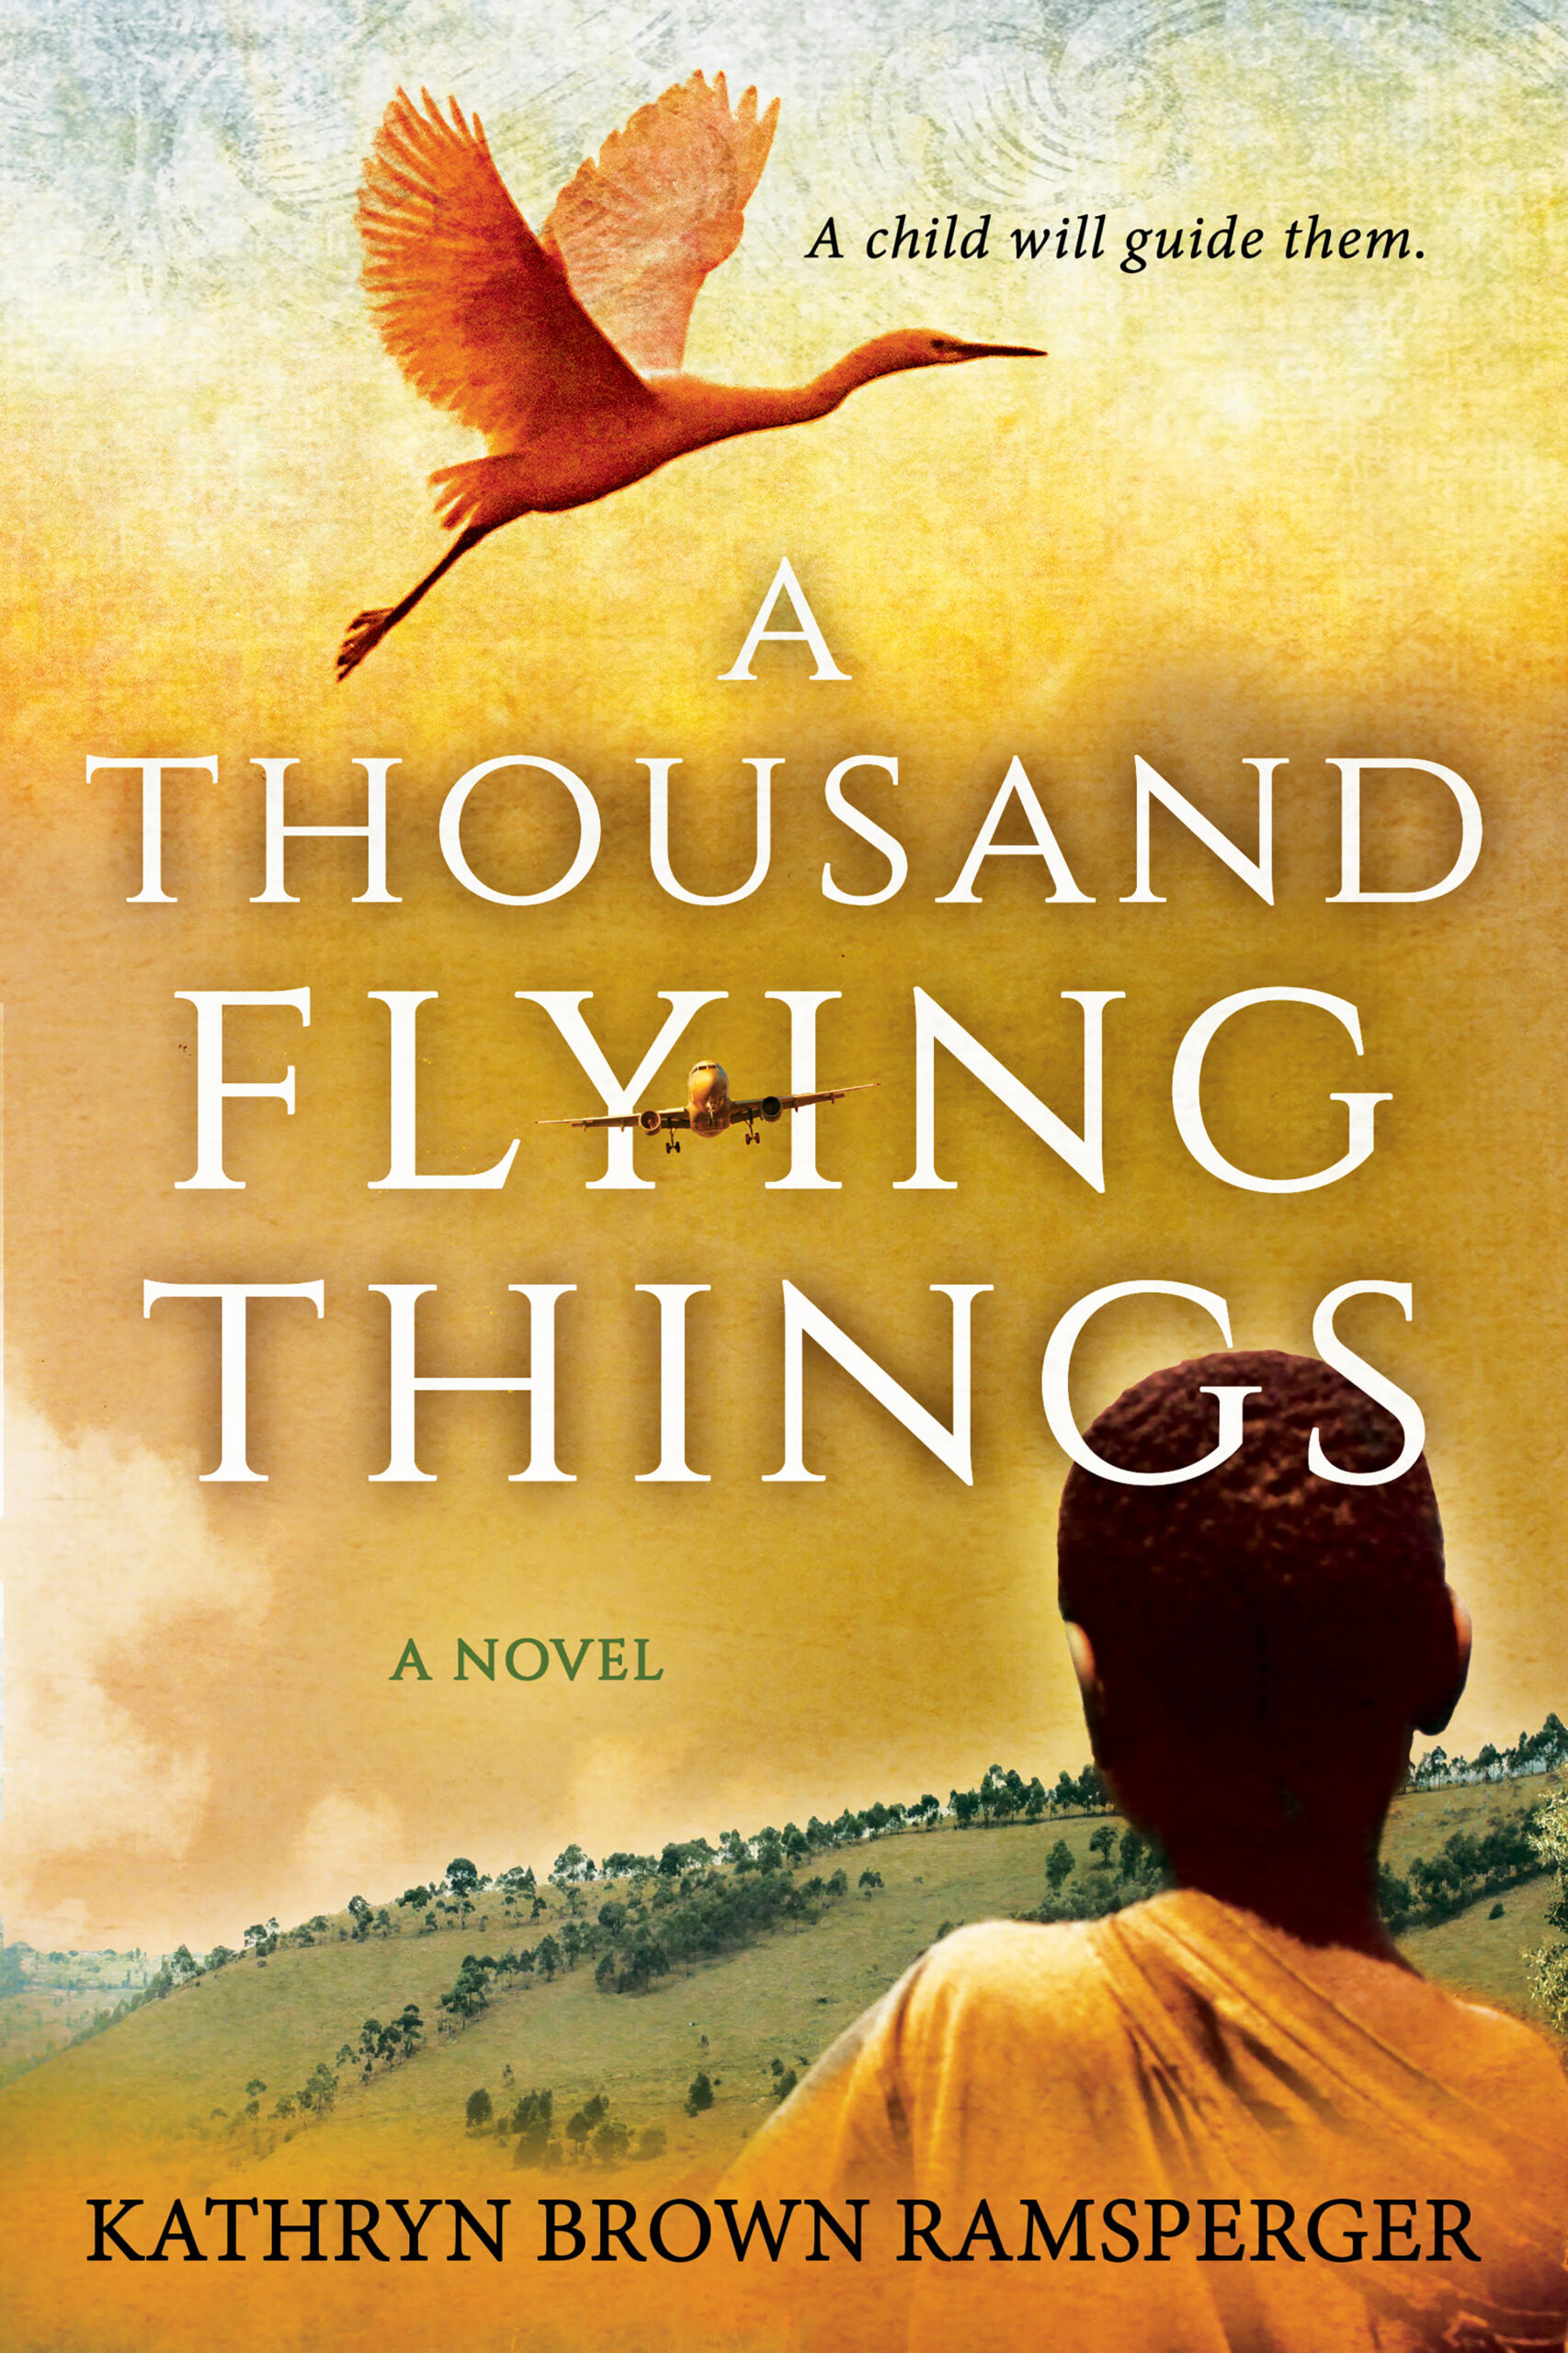 A Thousand Flying Things by Kathryn Brown Ramsperger